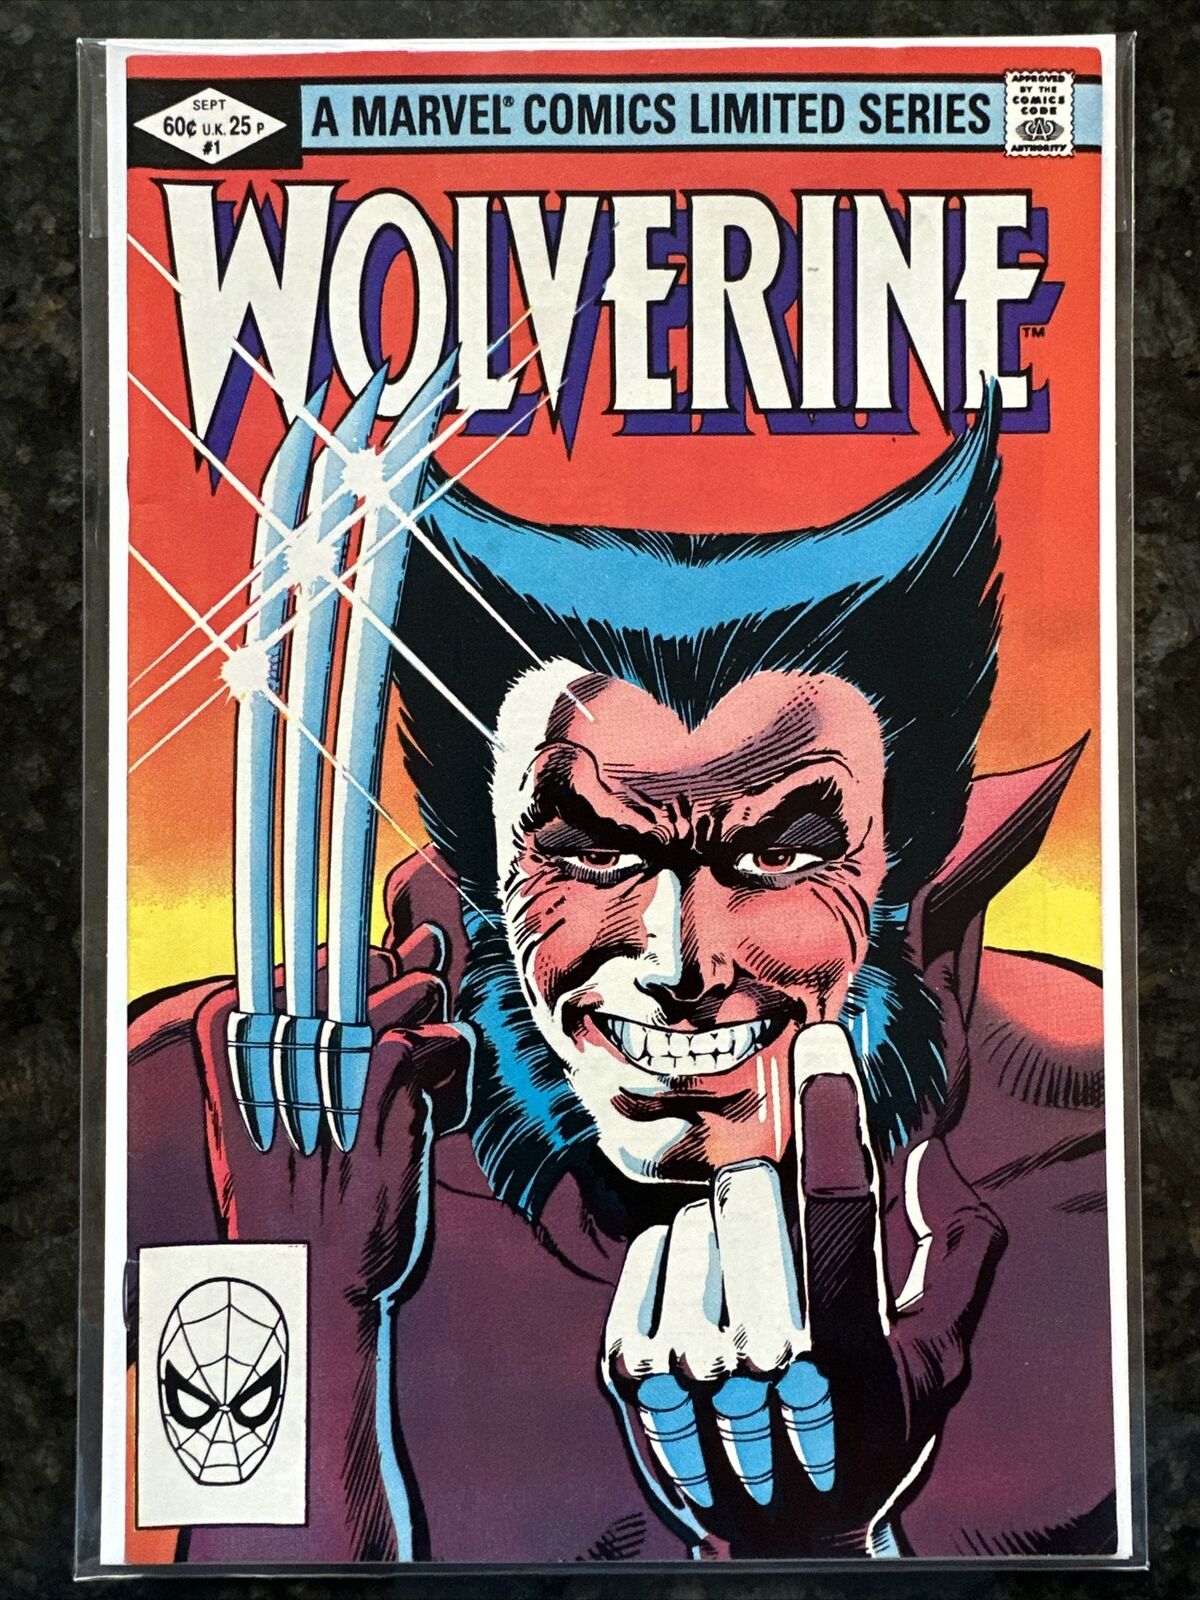 Wolverine #1 Limited Series 1982 Key Marvel Comic Book 1st Solo Wolverine Title